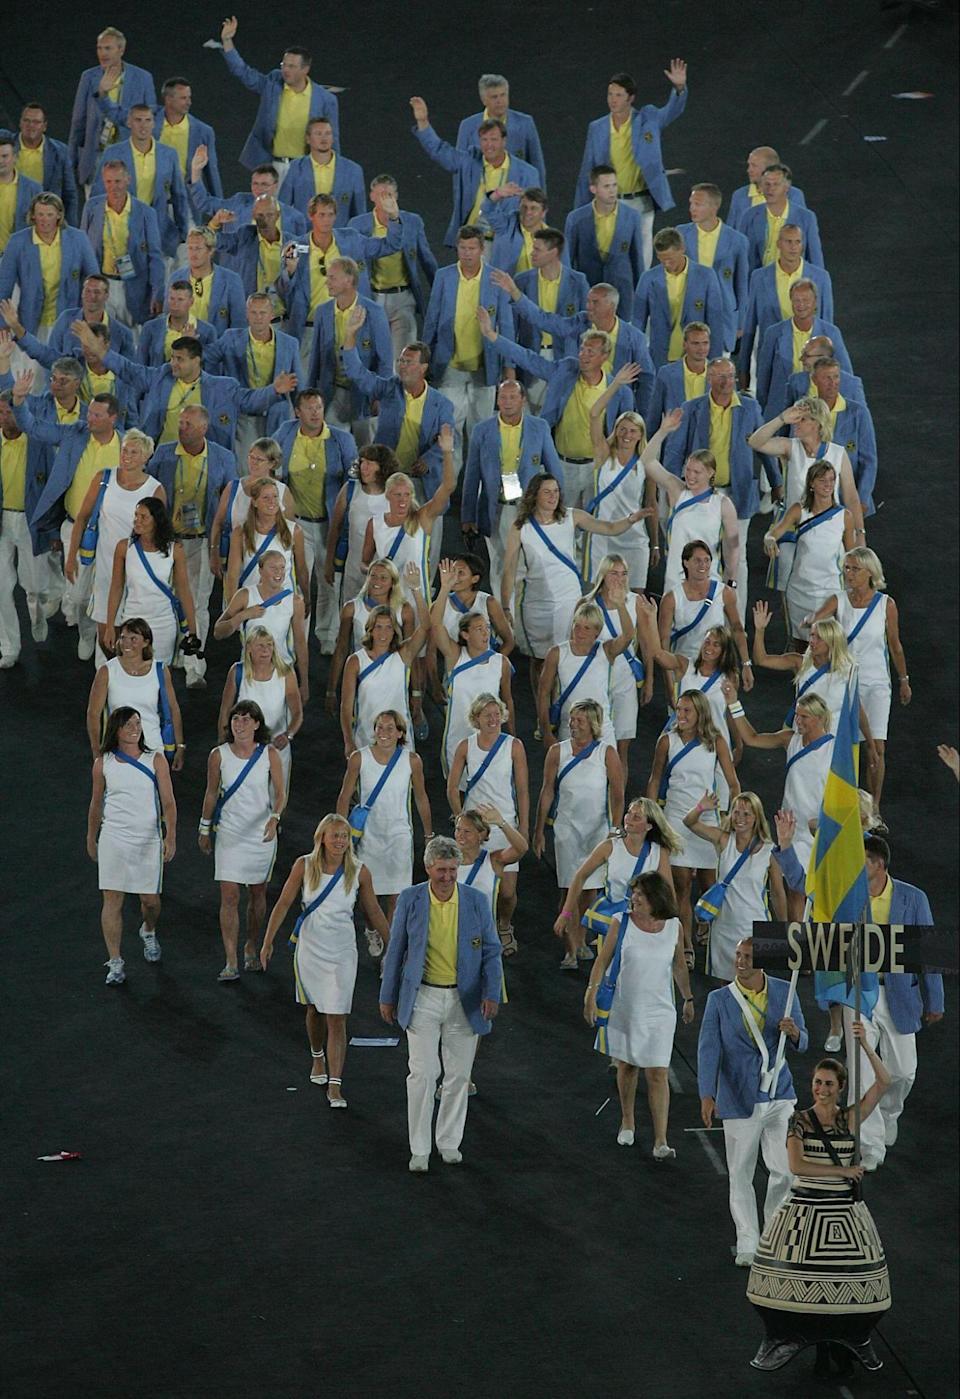 Sweden had different costumes for men and women at the 2004 Olympics (Jonathan Ferry/Getty Images)